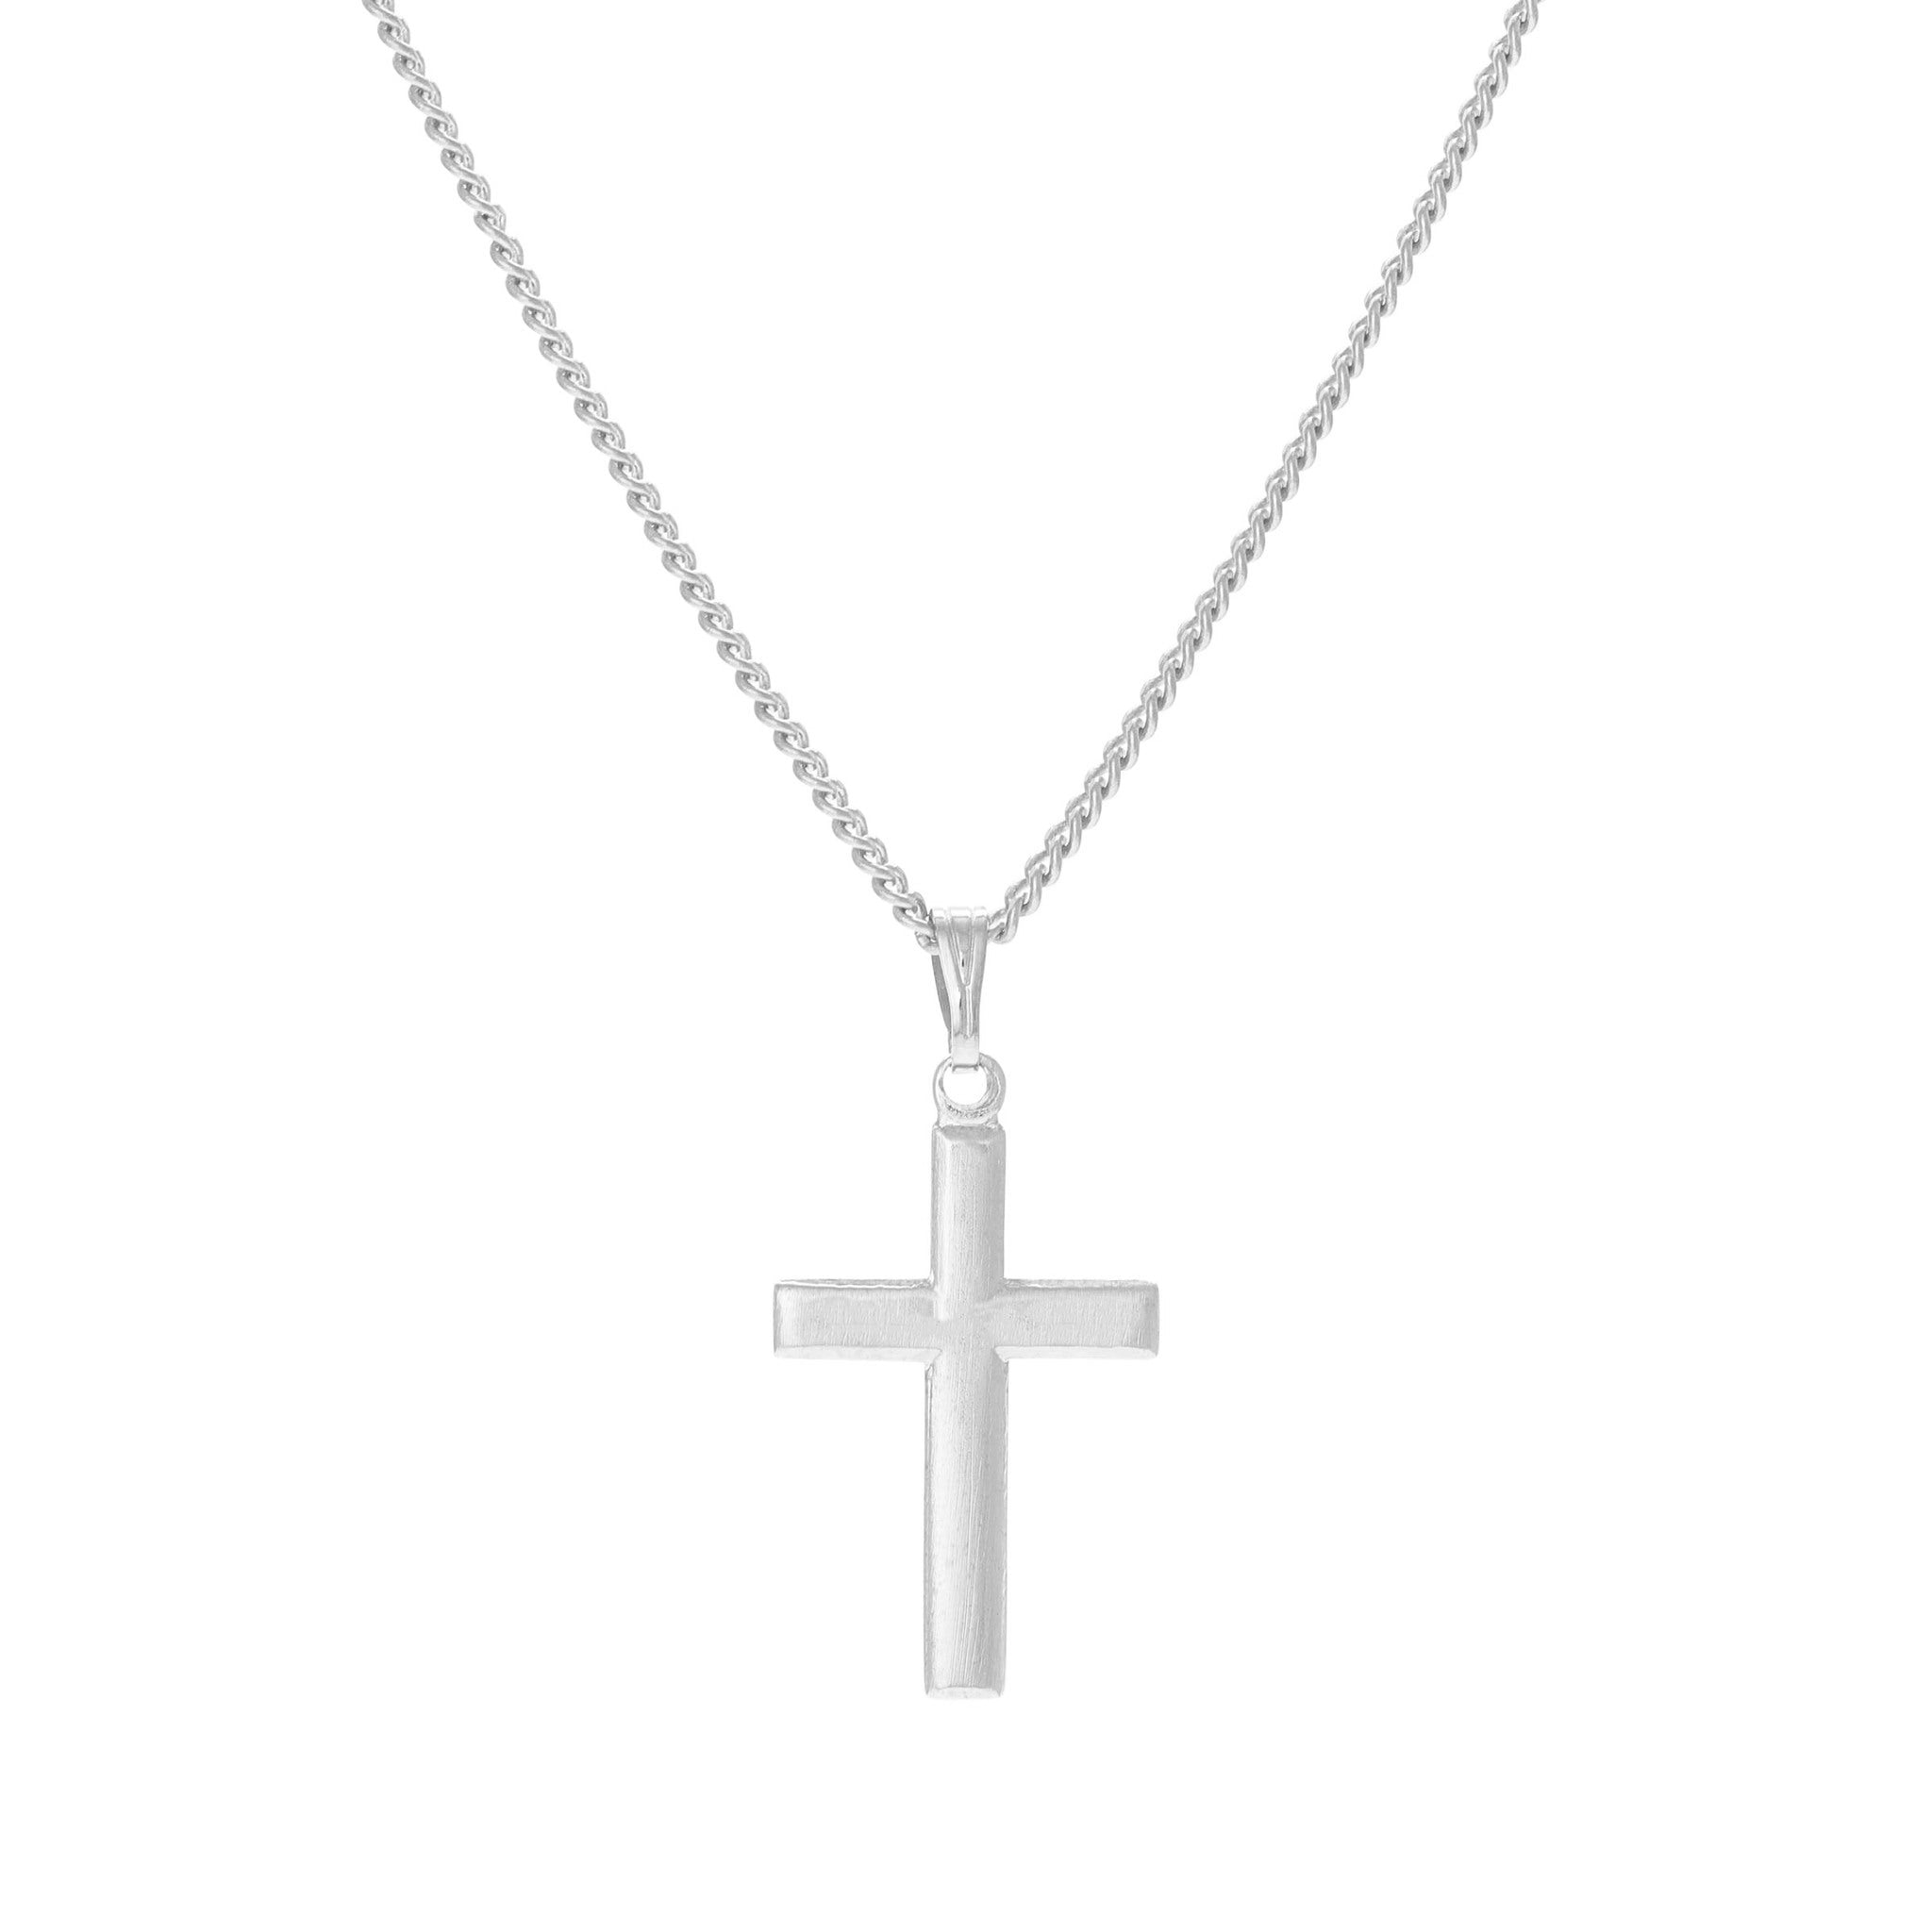 Personalized Mens Engraved Cross Necklace – Be Monogrammed